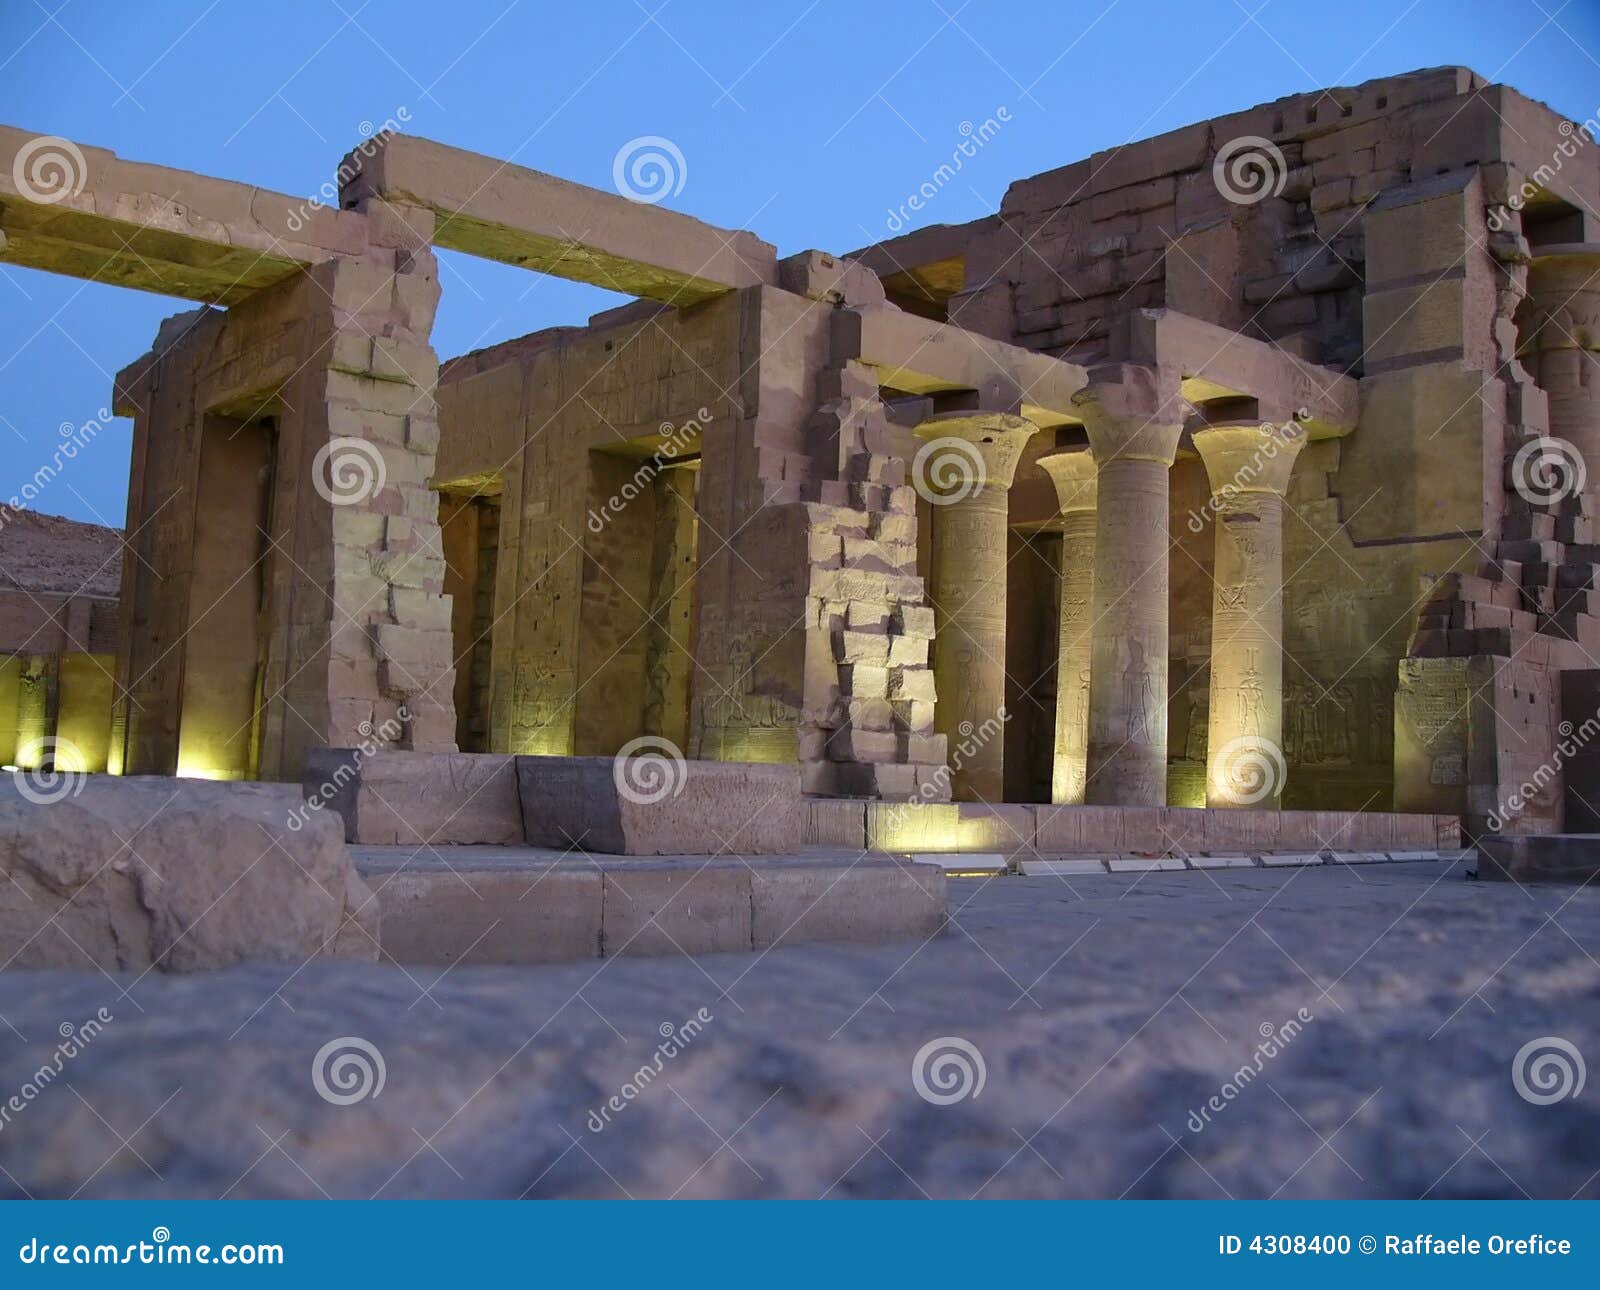 the egyptian ruins